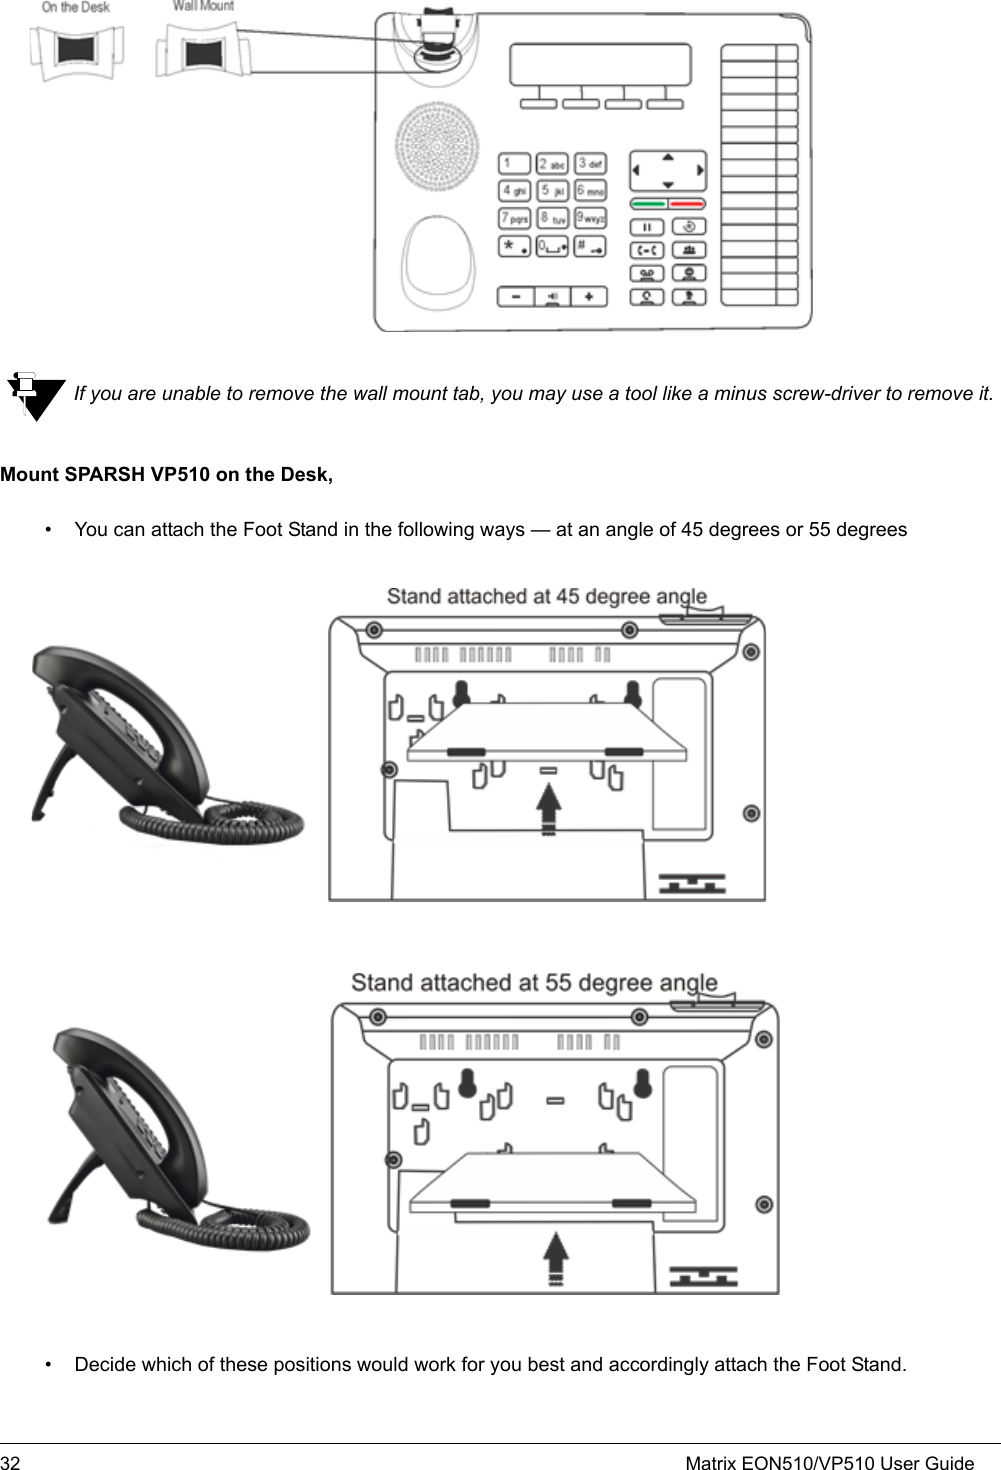 32 Matrix EON510/VP510 User GuideIf you are unable to remove the wall mount tab, you may use a tool like a minus screw-driver to remove it.Mount SPARSH VP510 on the Desk,• You can attach the Foot Stand in the following ways — at an angle of 45 degrees or 55 degrees• Decide which of these positions would work for you best and accordingly attach the Foot Stand.